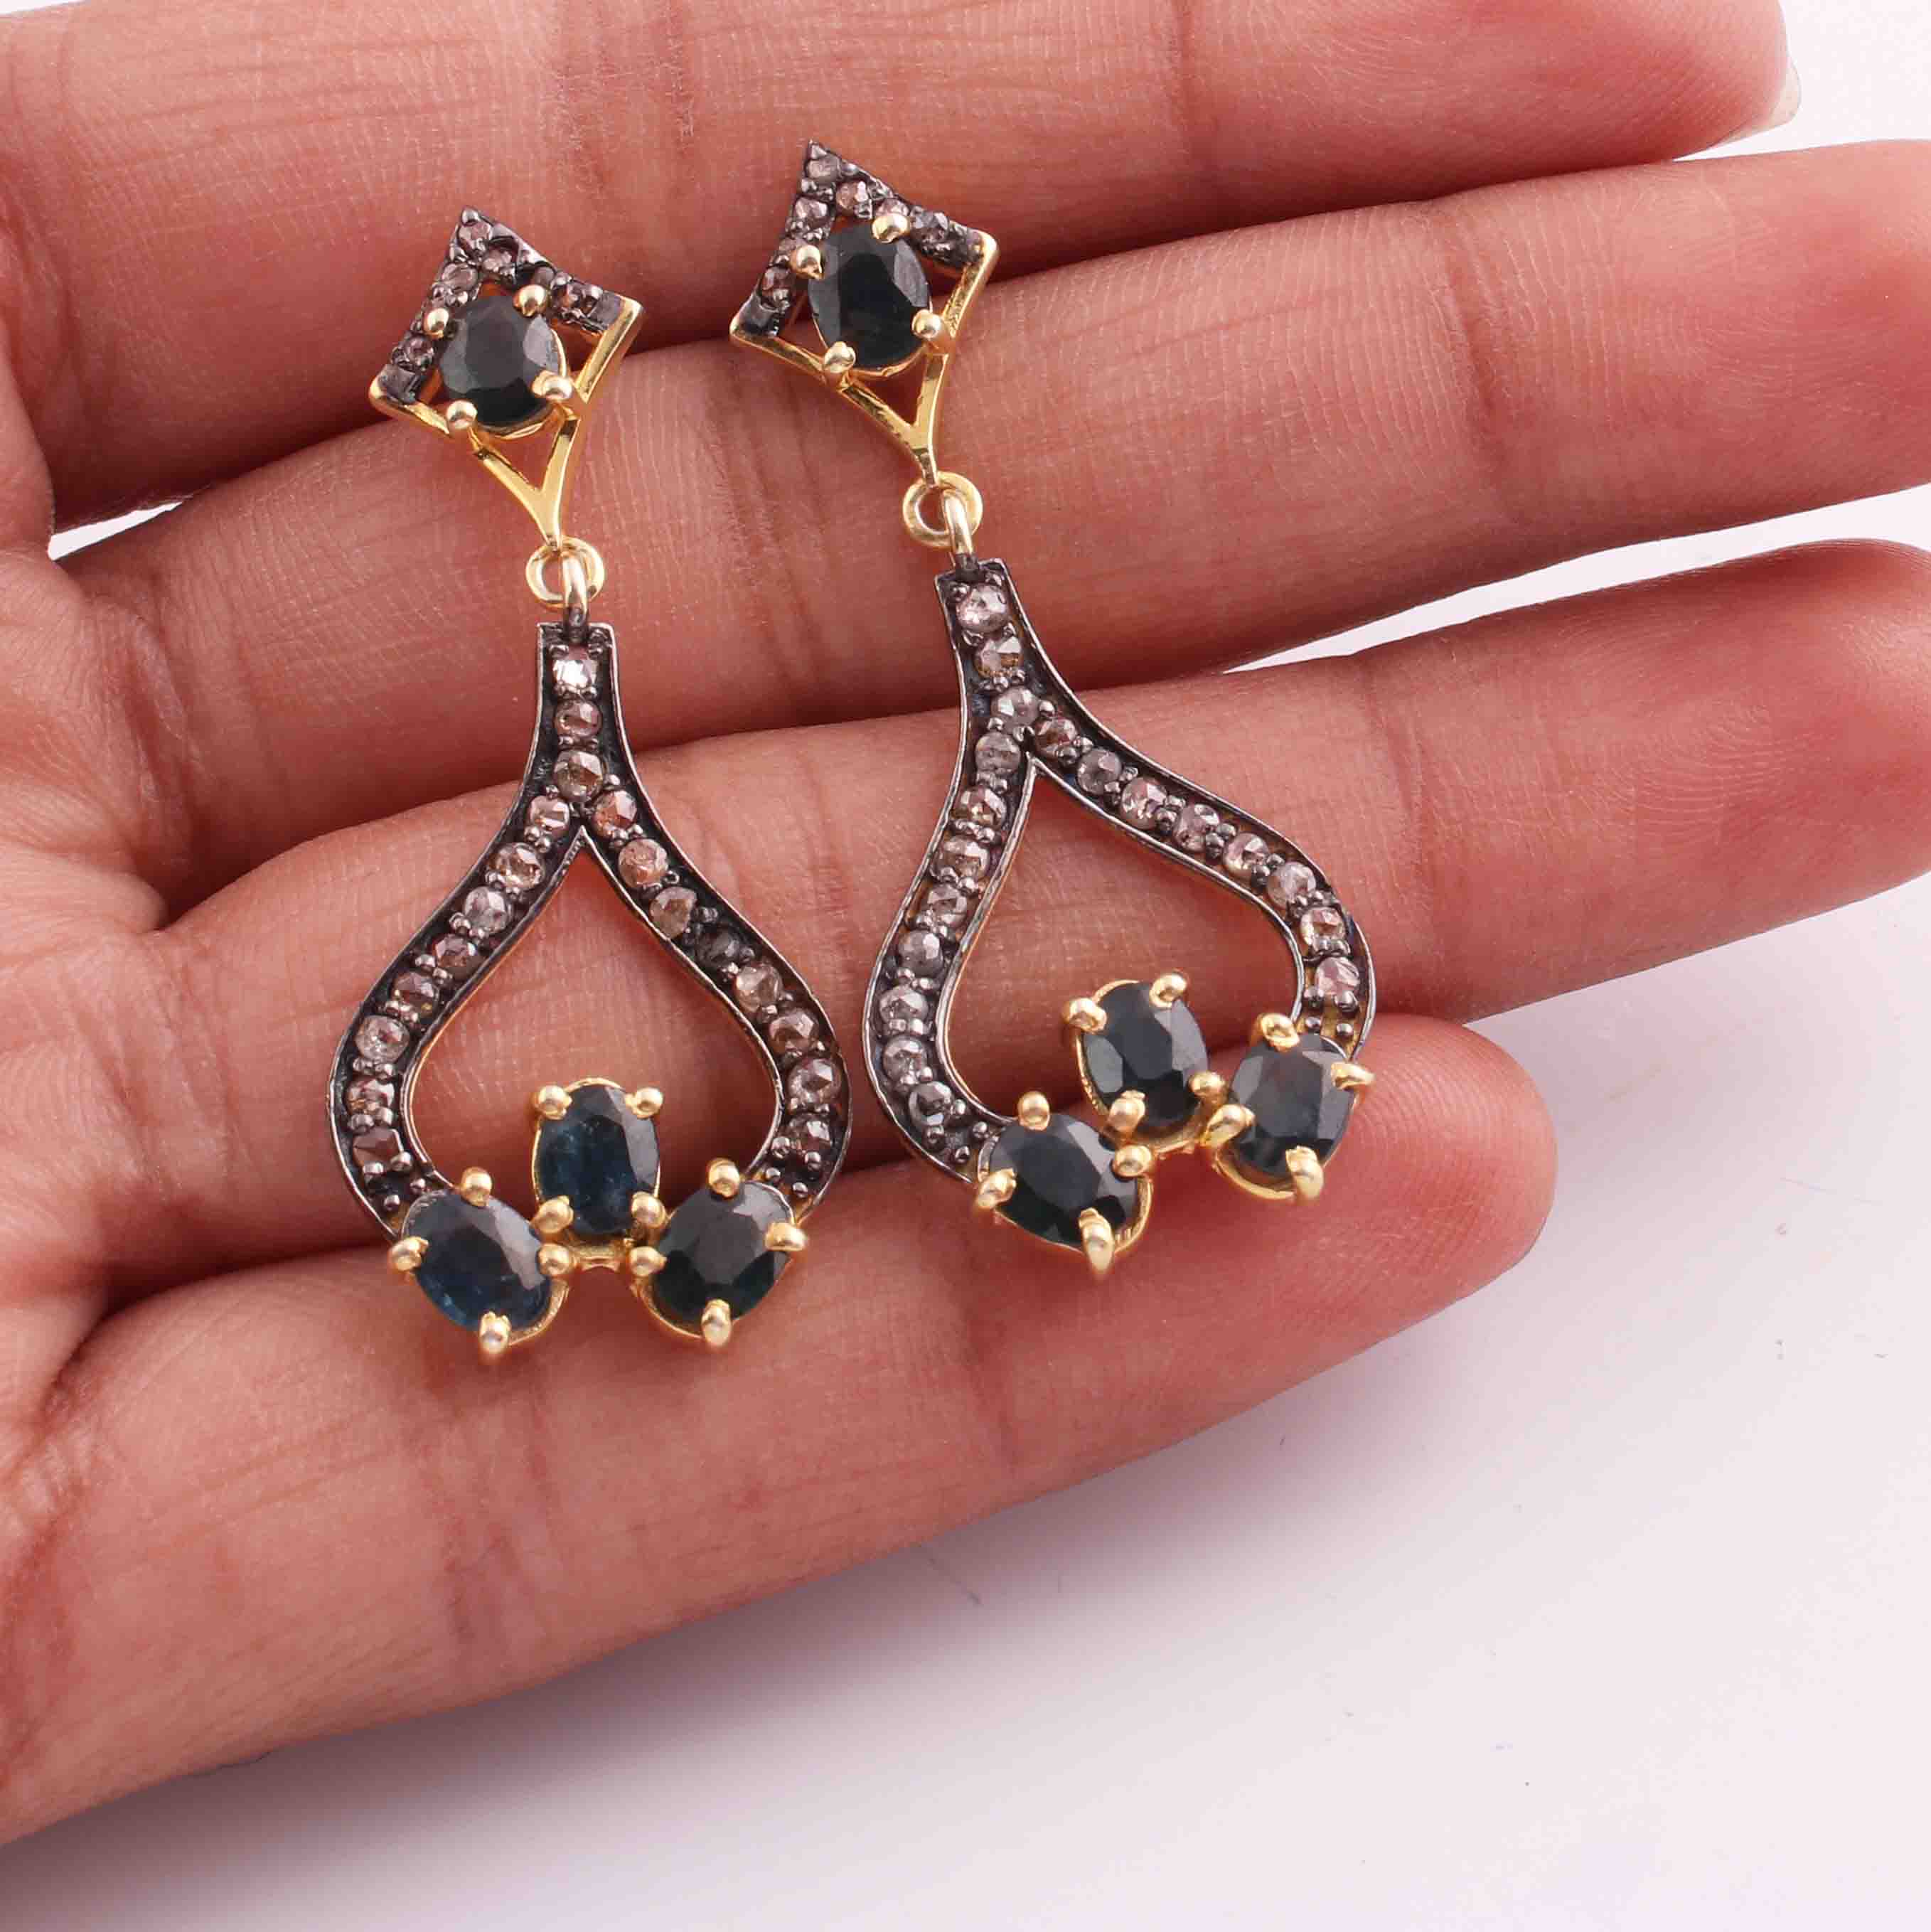 Share more than 239 fancy stud earrings latest